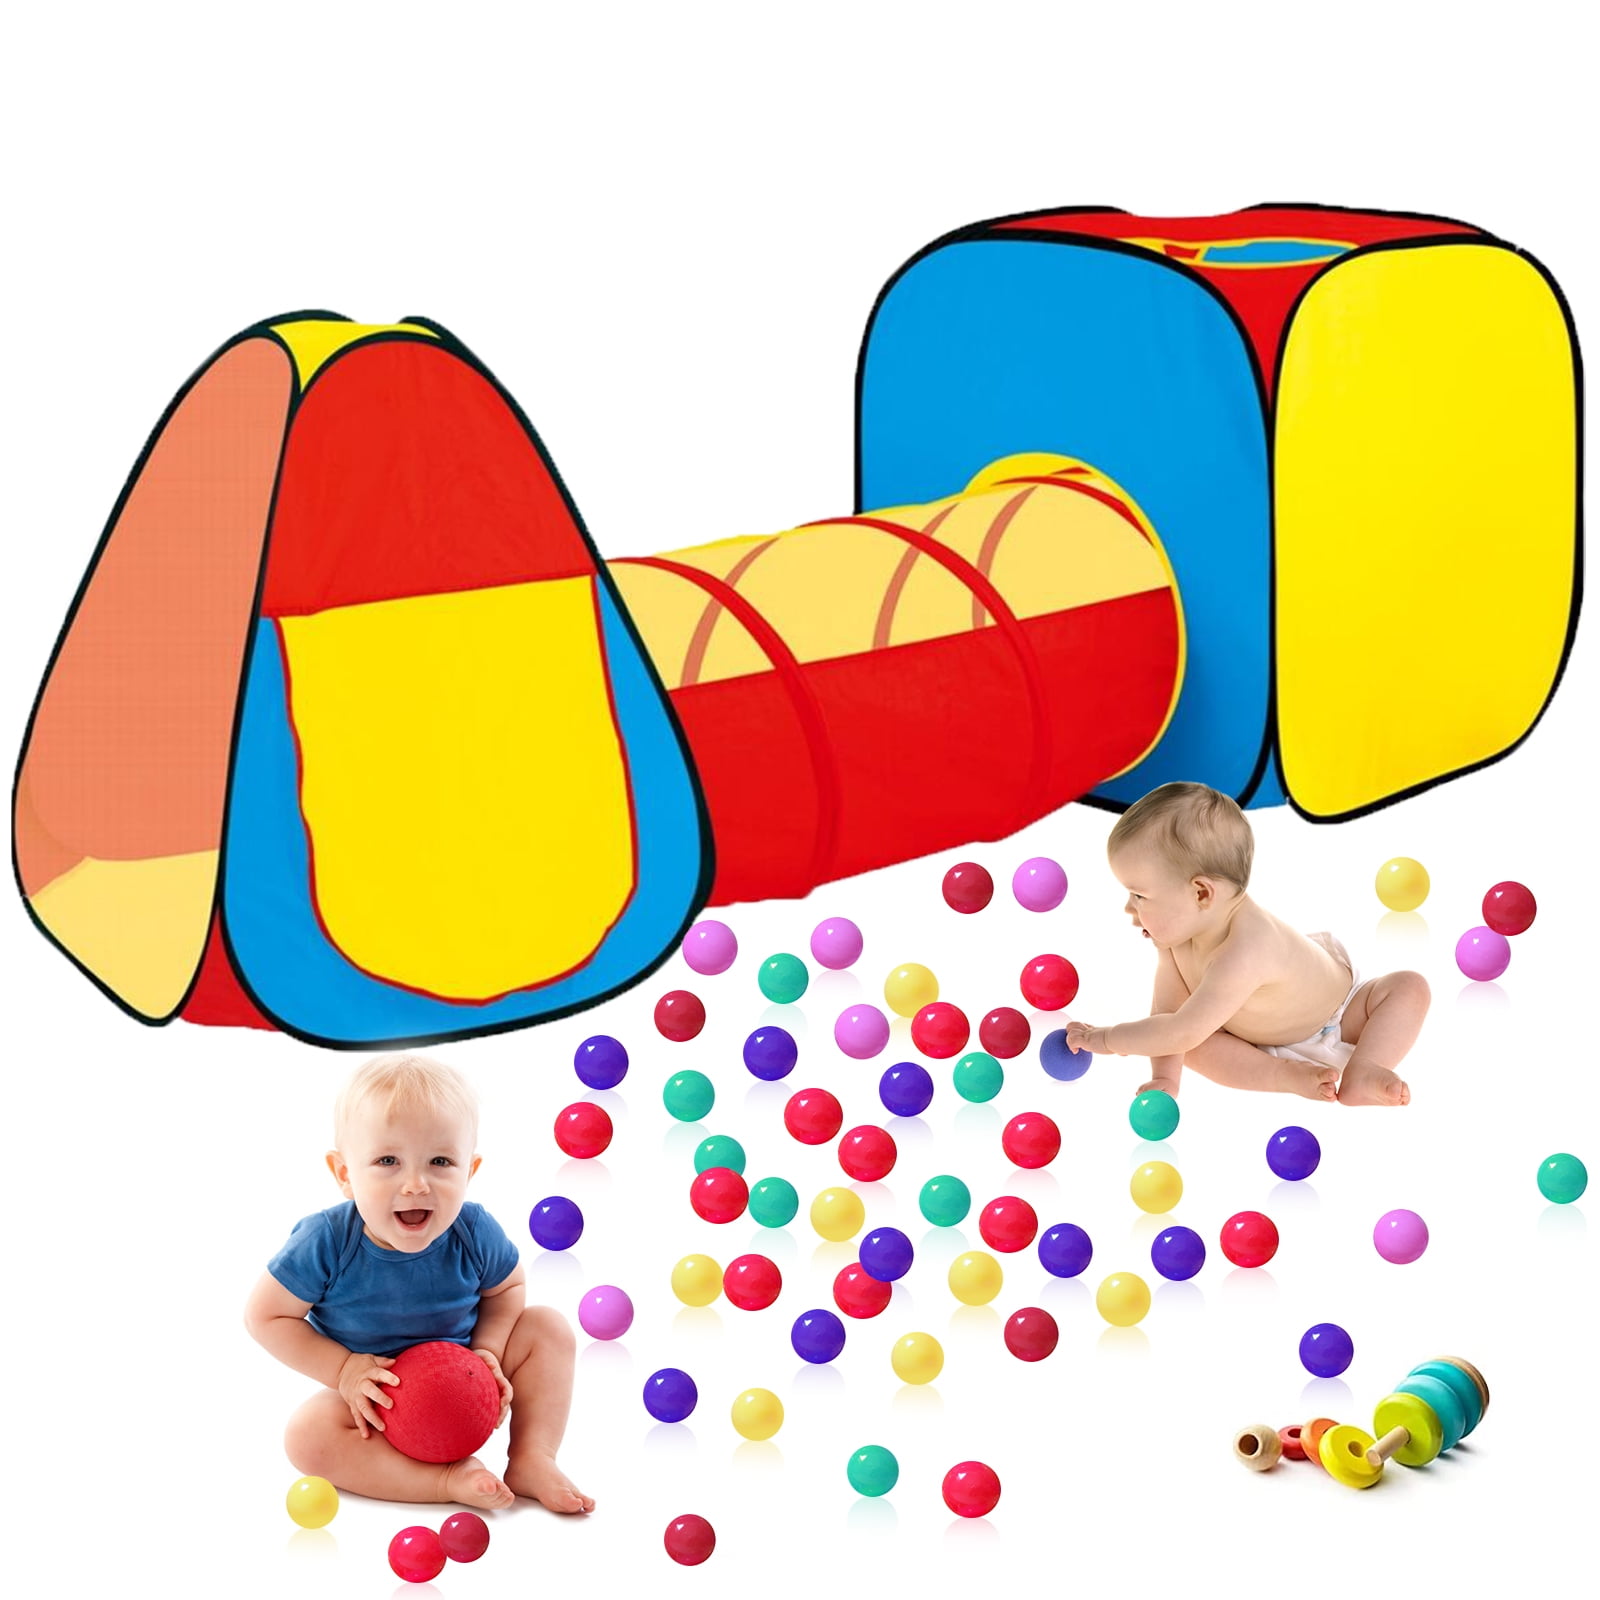 Kids Pop Up Crawl Tunnel Play Tent Toy Indoors/outdoors Garden Game Playhouse UK 